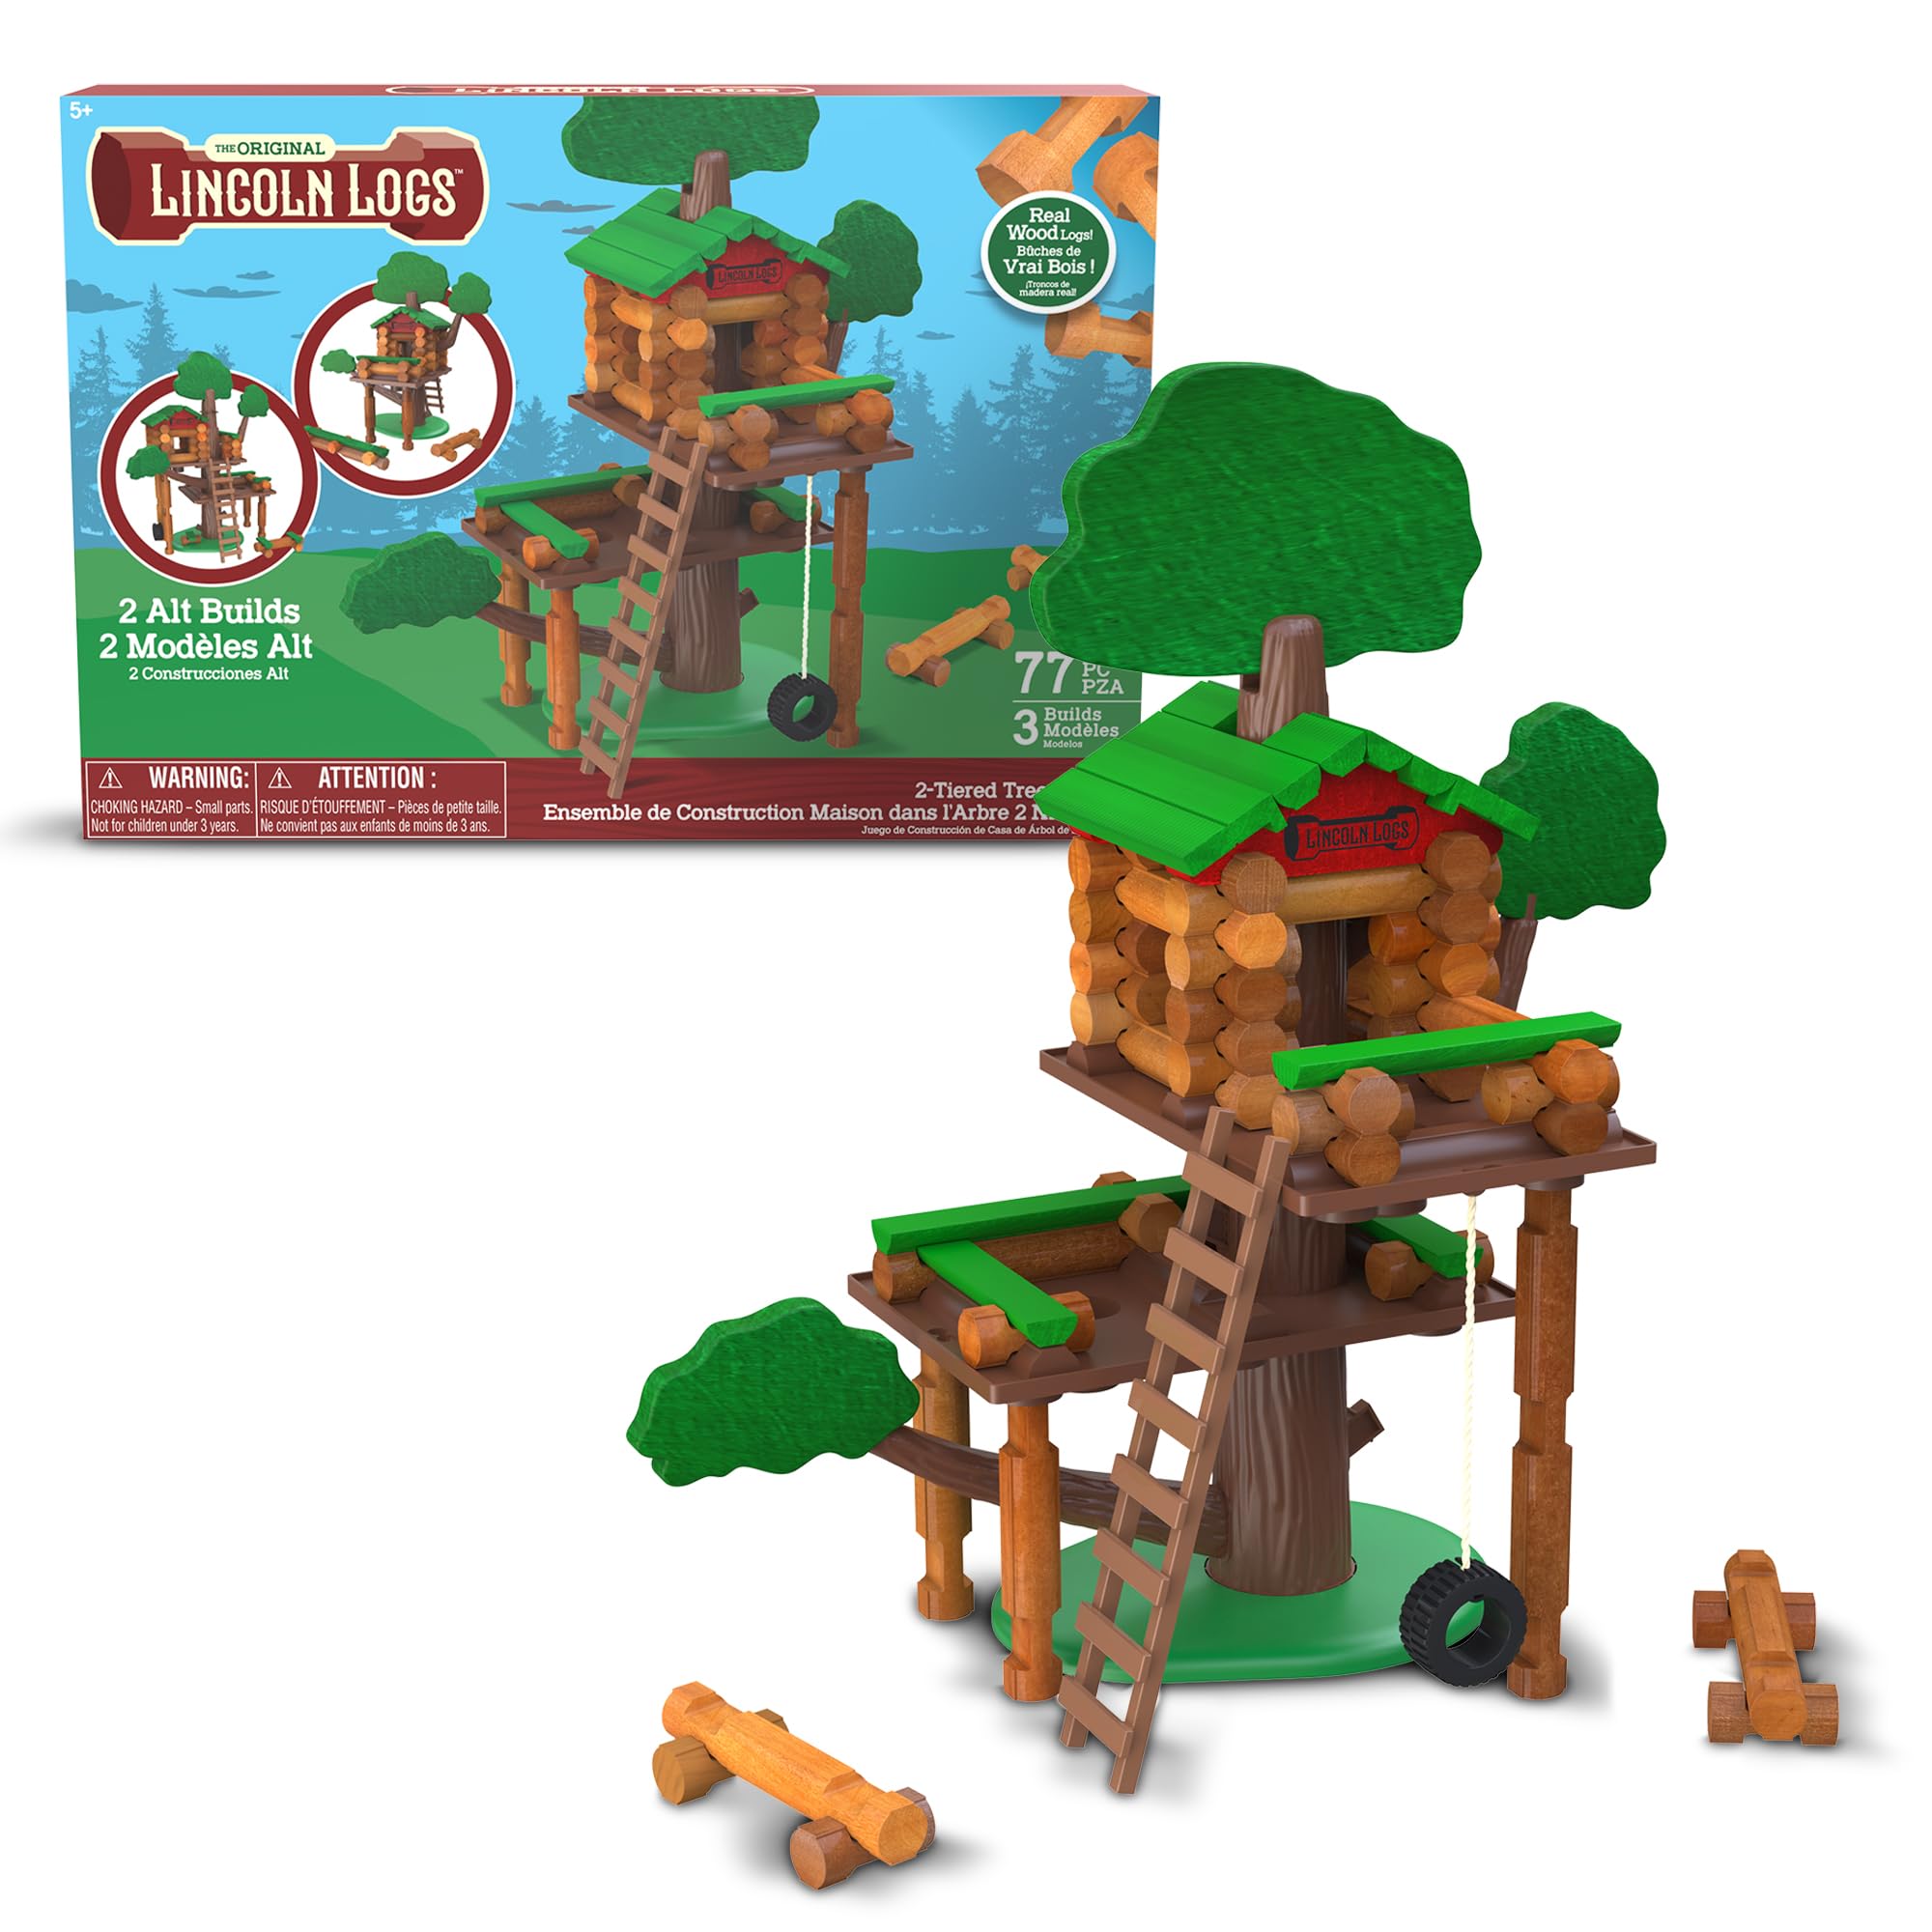 Lincoln Logs 2 Tiered Tree House Building Set, Educational Toy, Gift for Kids, Girls and Boys, STEM Retro Classic Toy